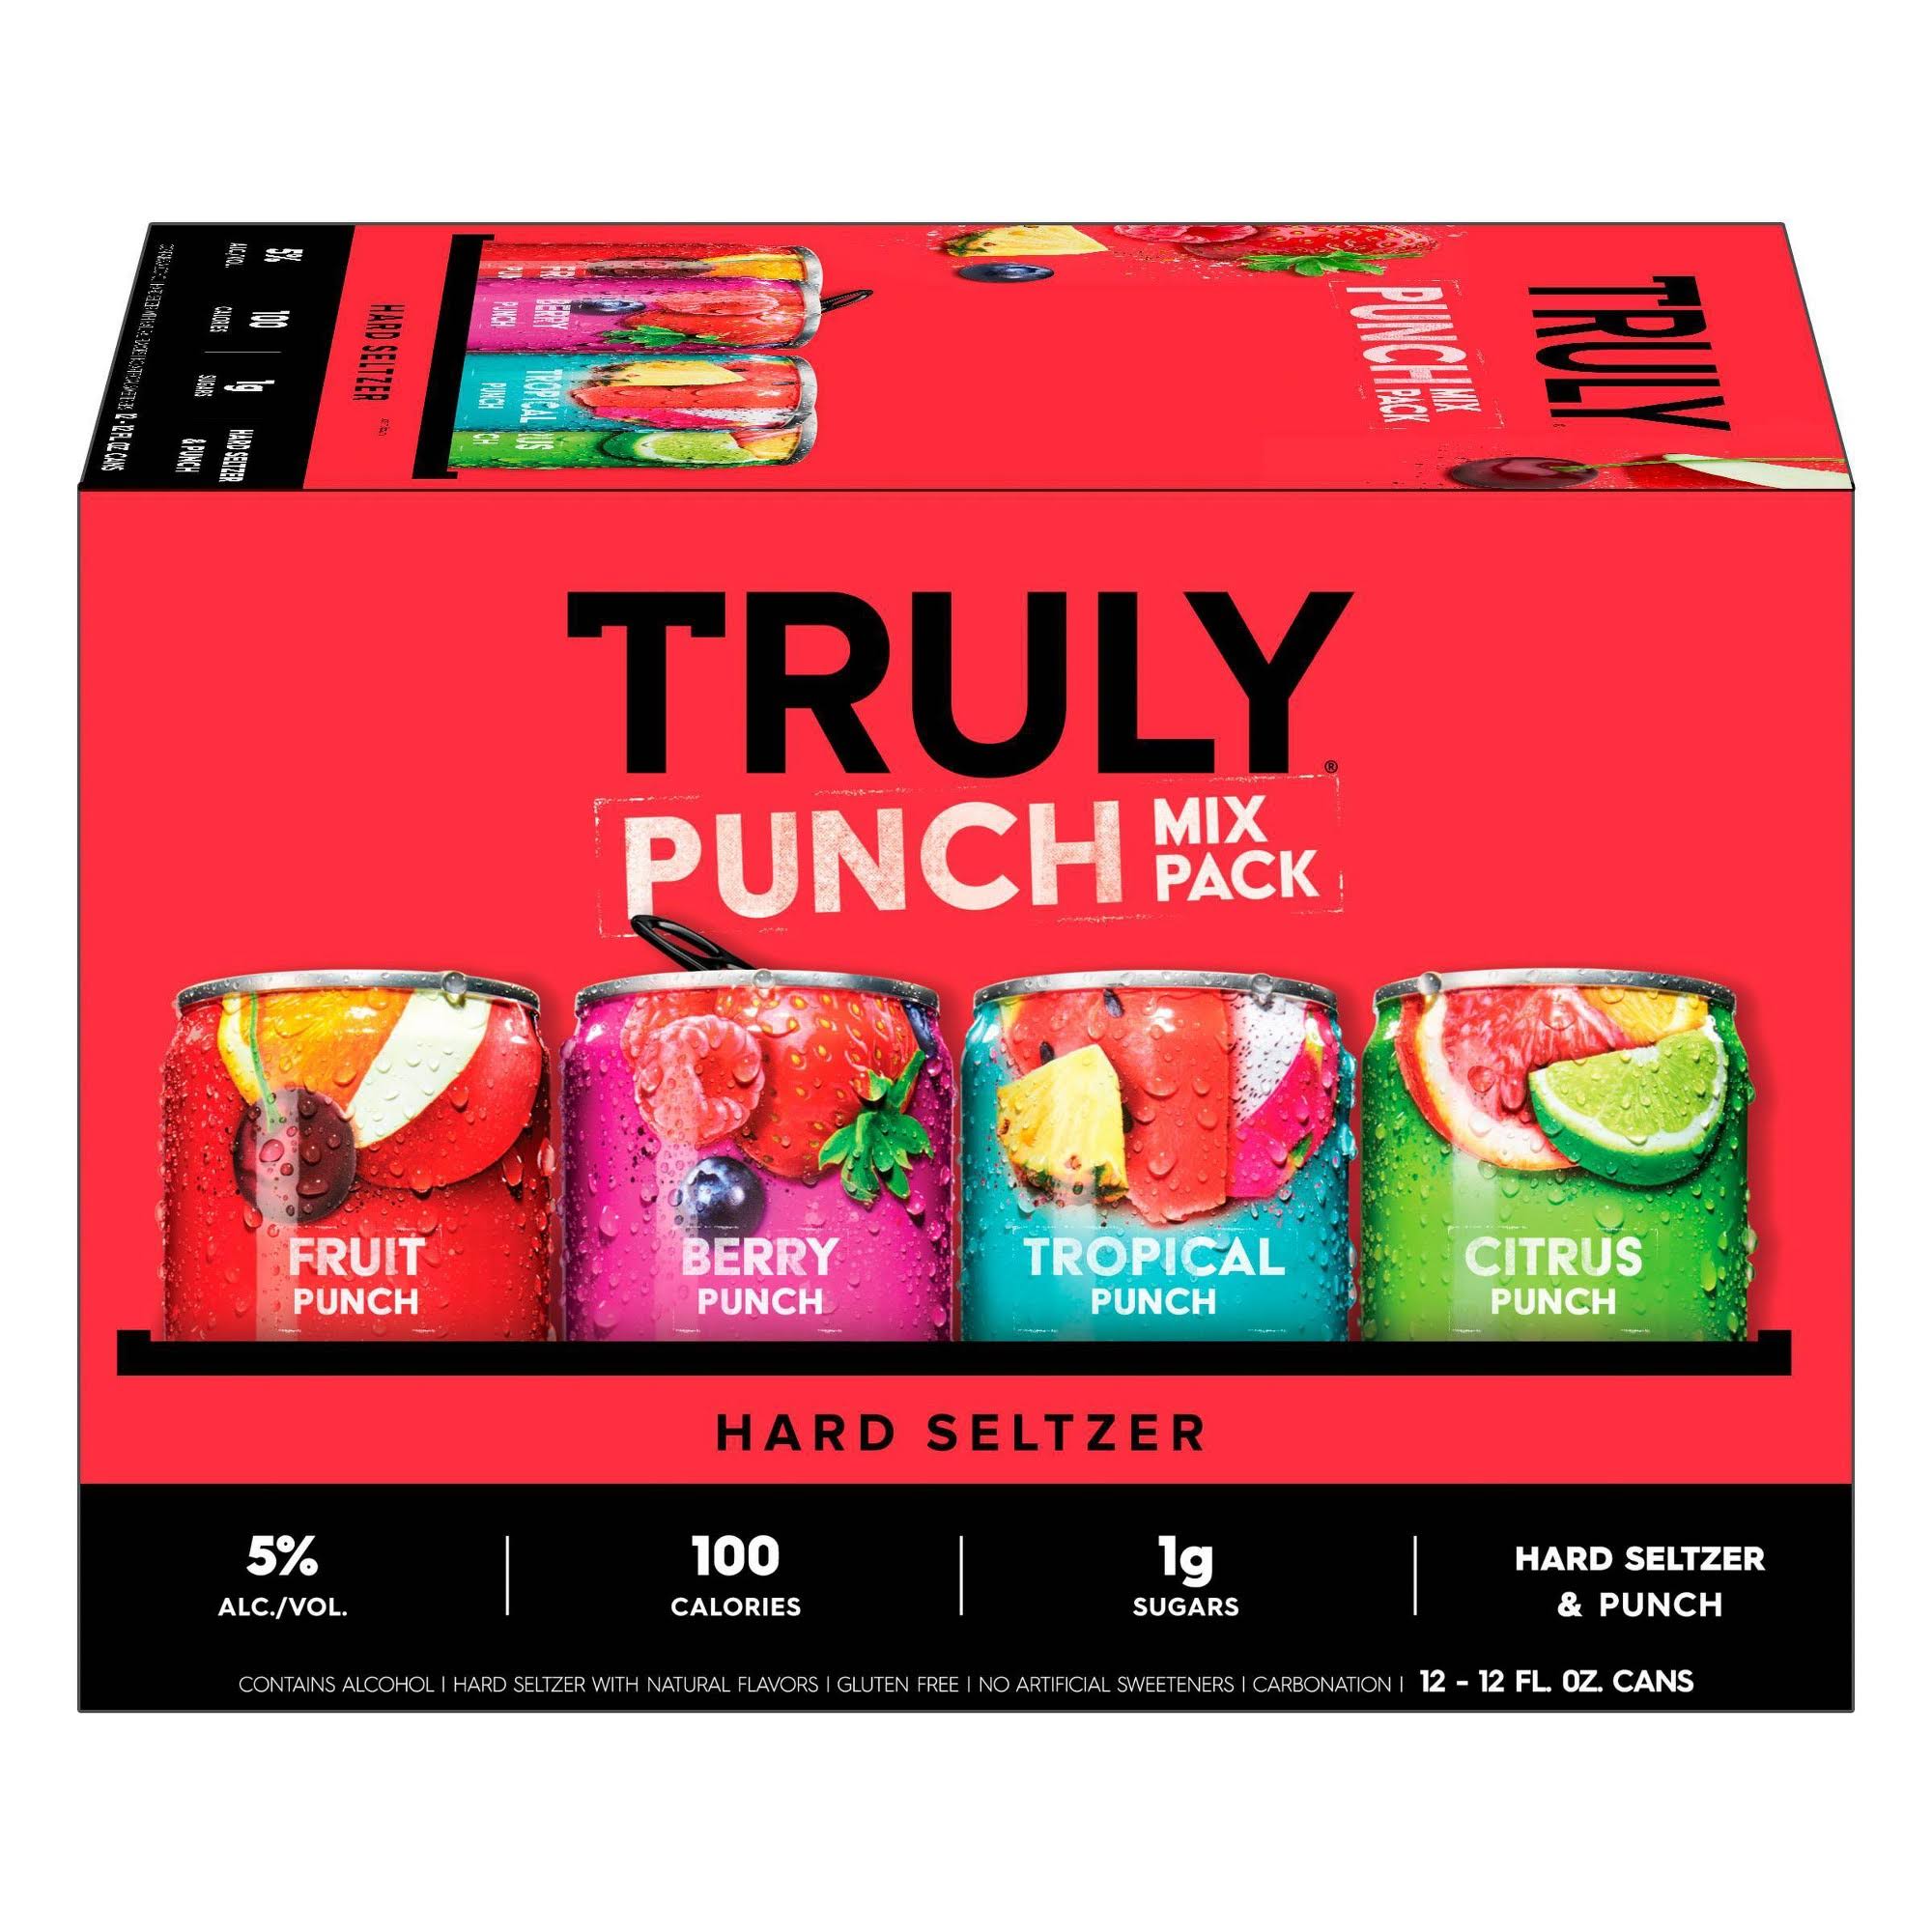 Truly Hard Seltzer, Punch, Mix Pack - 12 pack, 12 fl oz cans